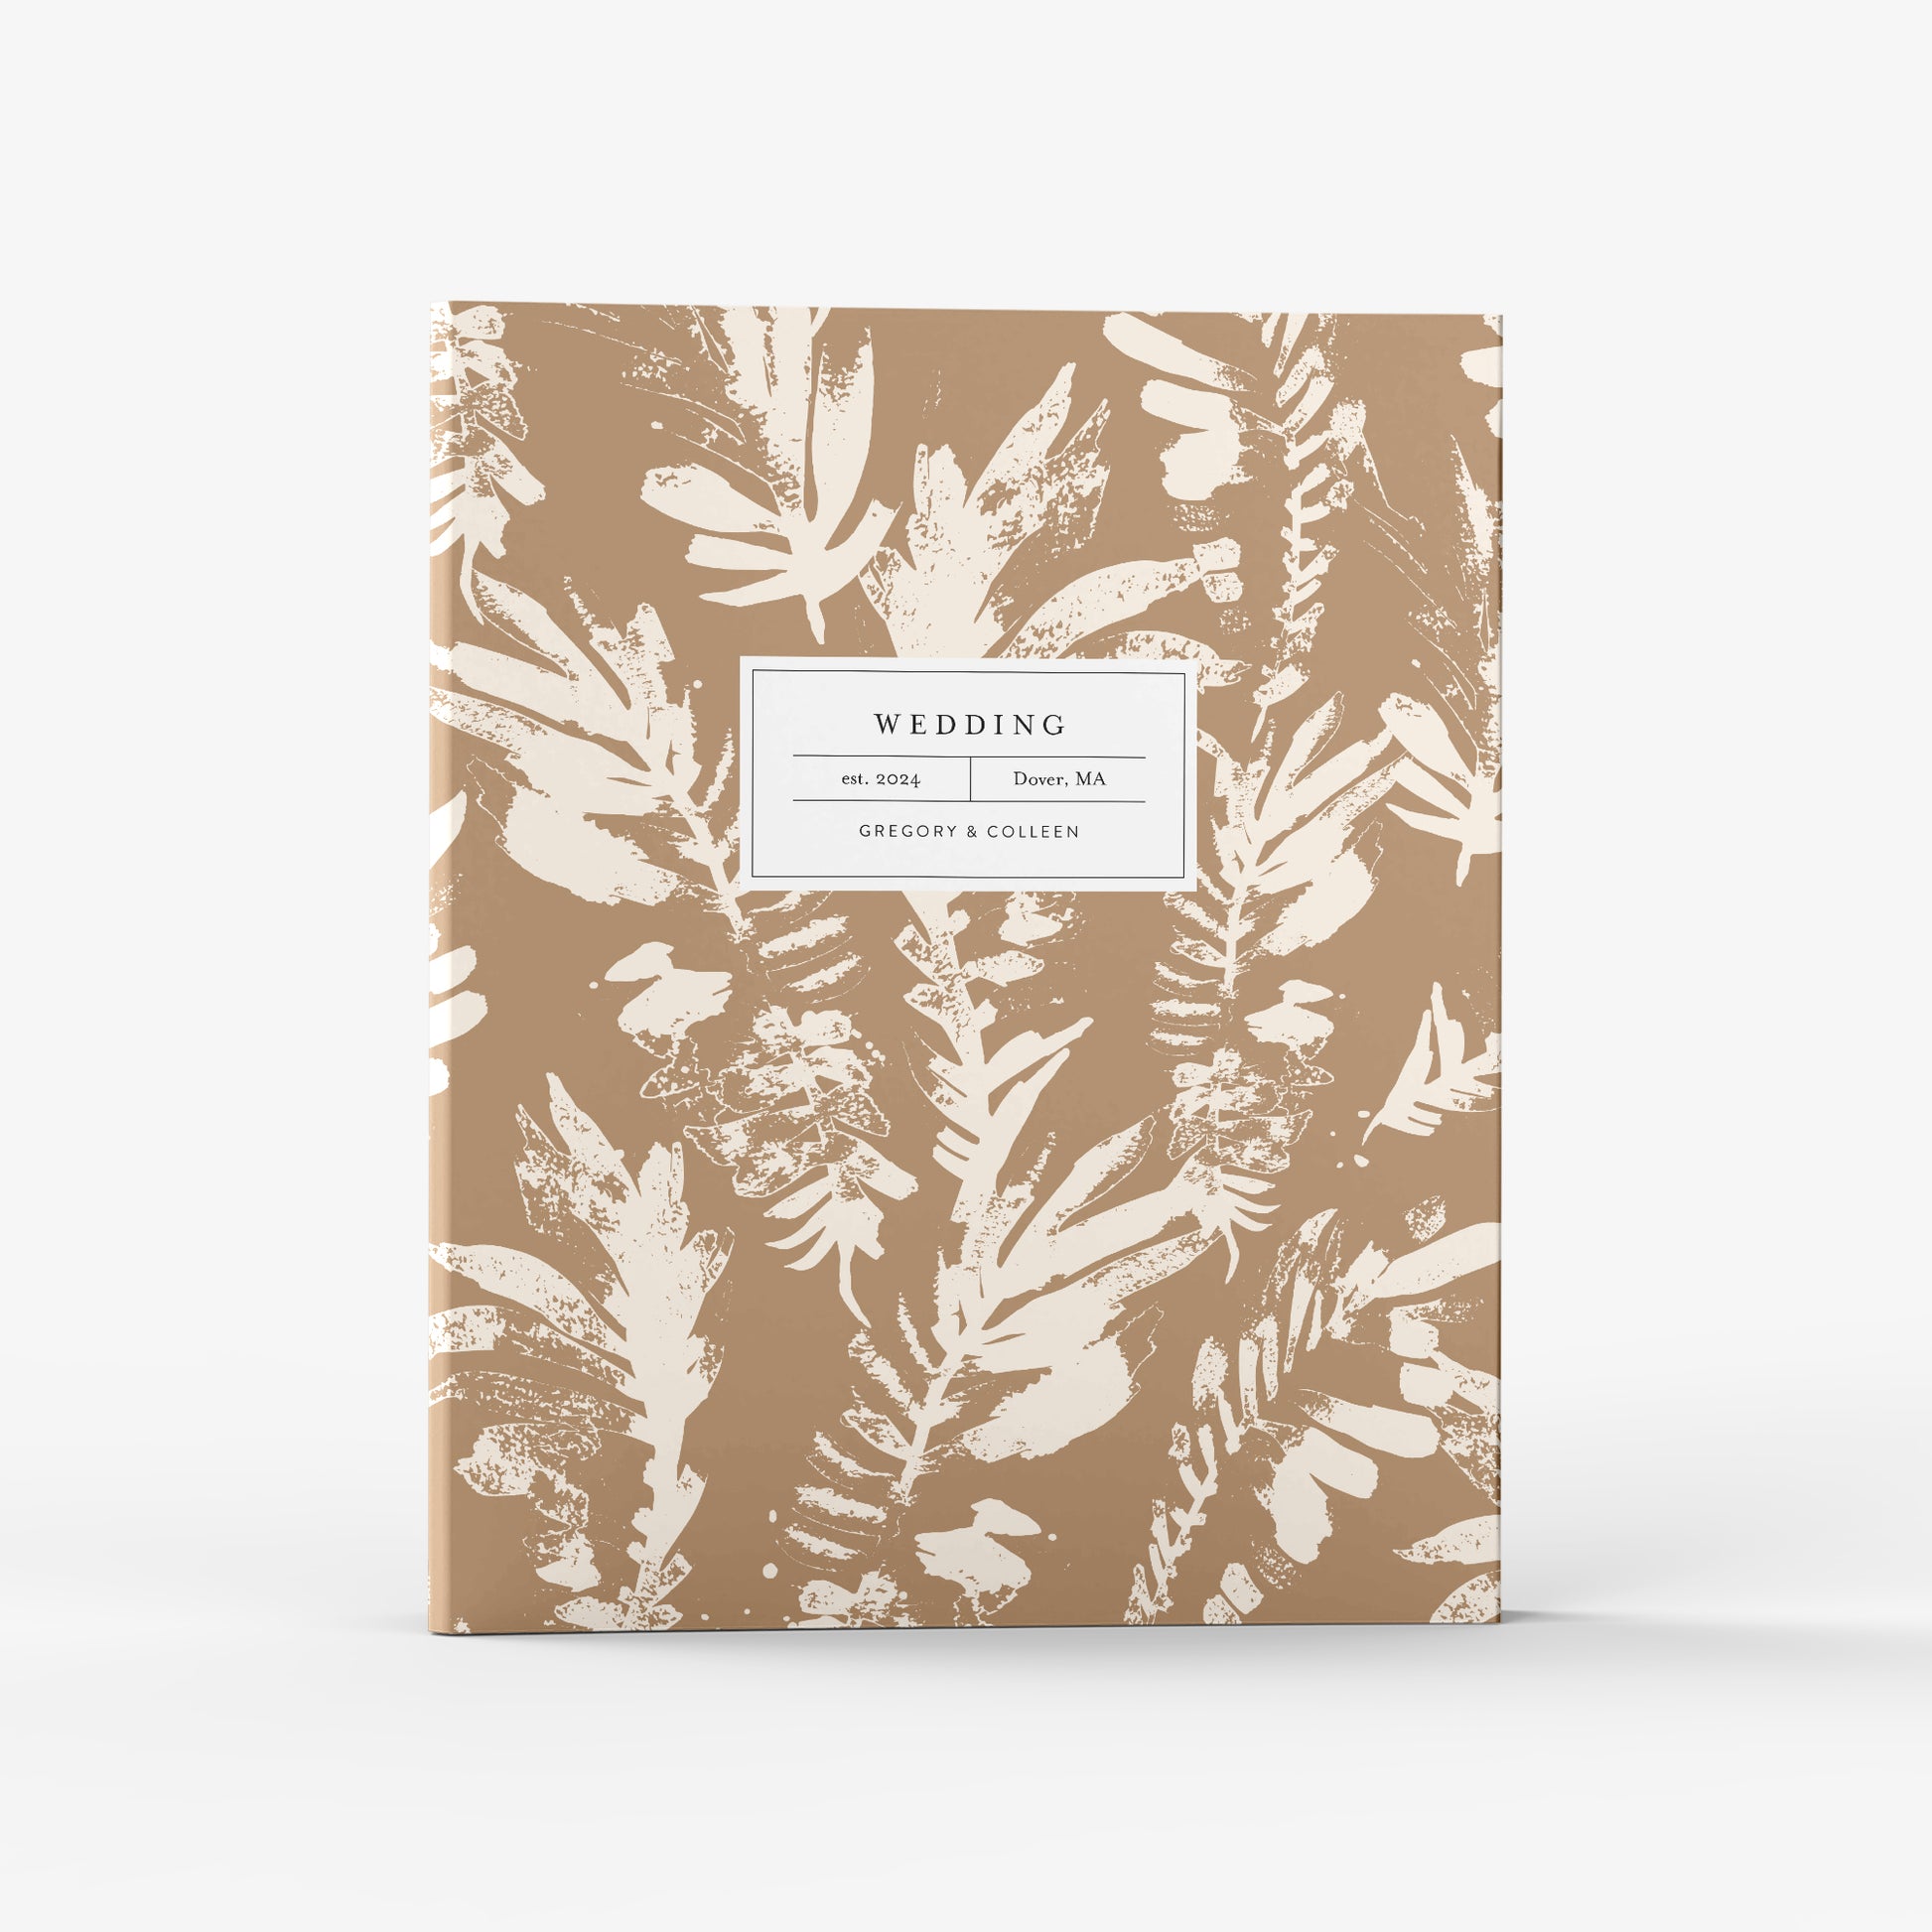 Our wedding binders are the perfect planning tool, shown in a neutral boho leaf pattern